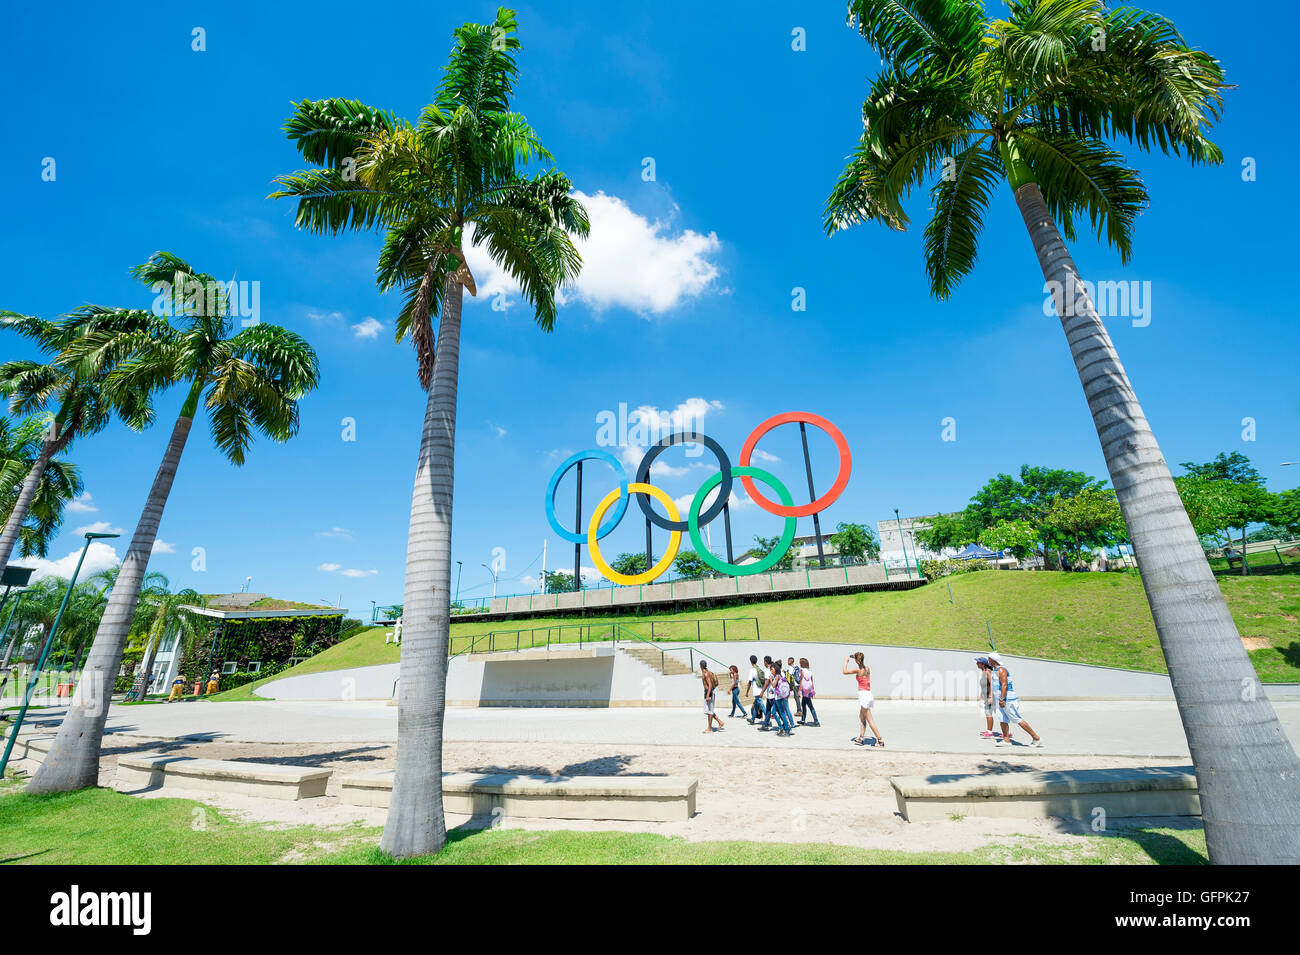 RIO DE JANEIRO - MARCH 18, 2016: Young Brazilians walk in front of Olympic rings installed for the 2016 Summer Games. Stock Photo